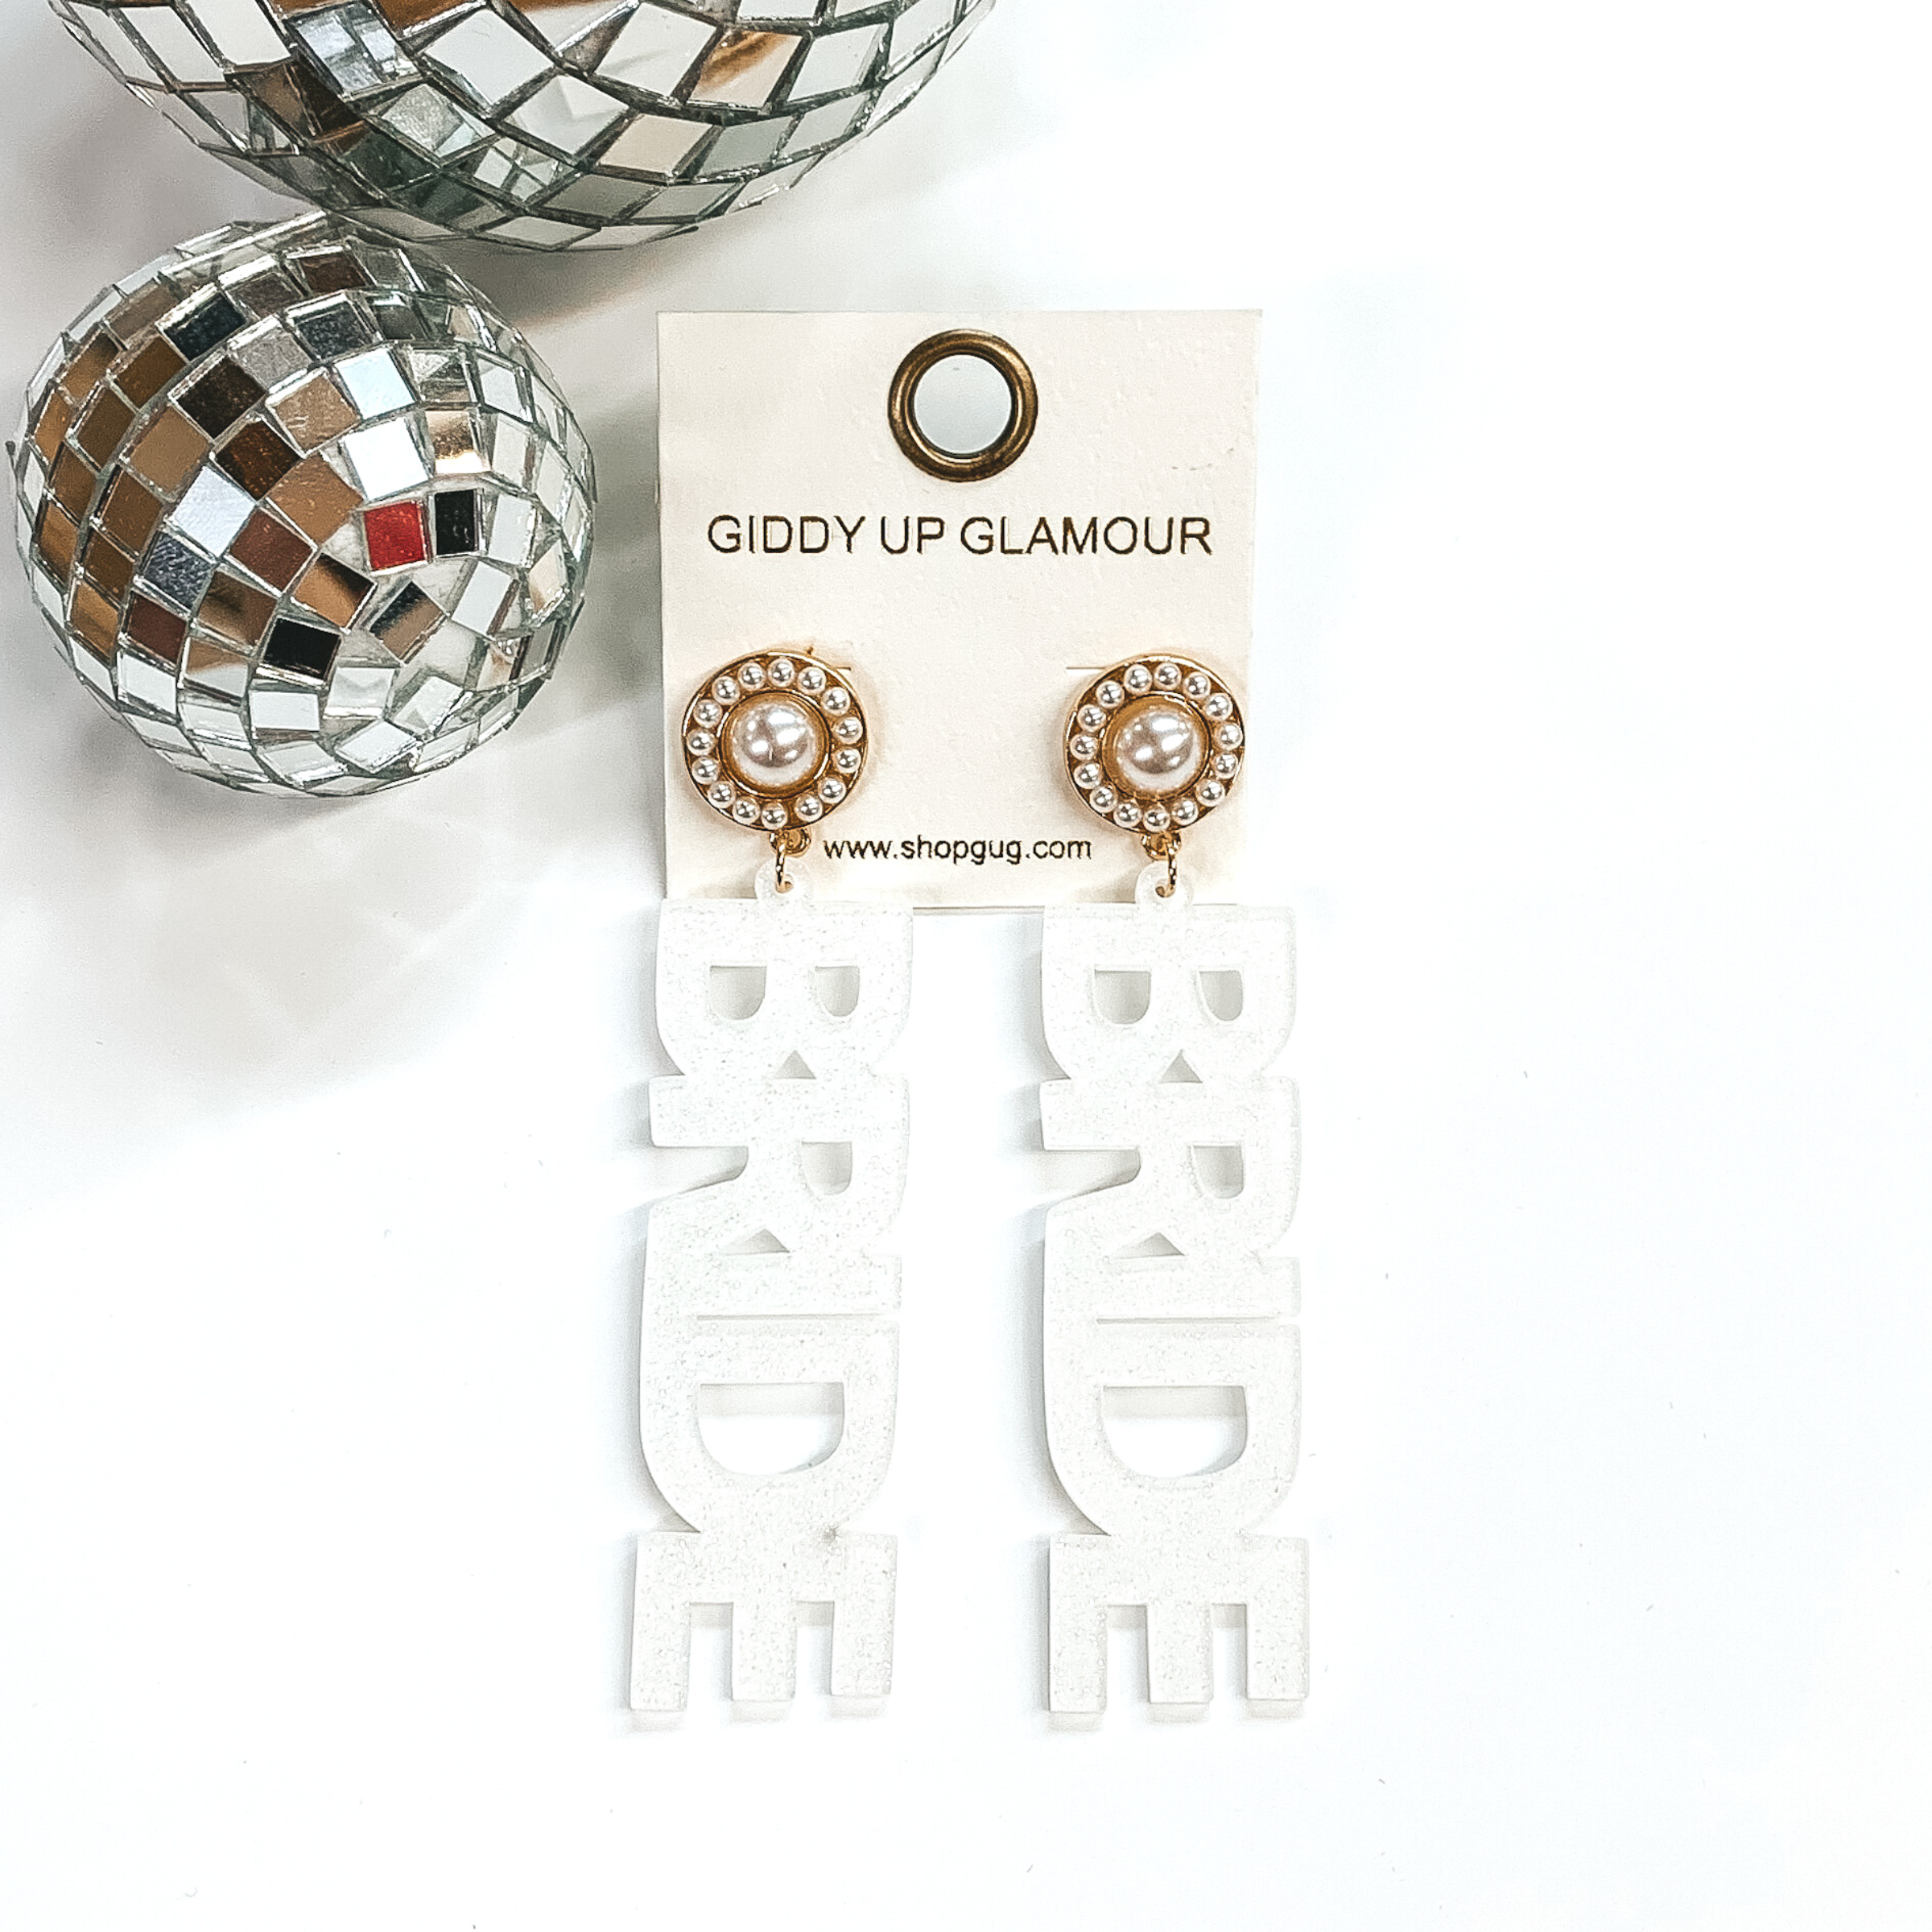 Gold circle studs with white pearls. There is a drop pendant in white glitter that spells out "BRIDE." These earrings are pictured on a white background with disco balls in the top left corner. 